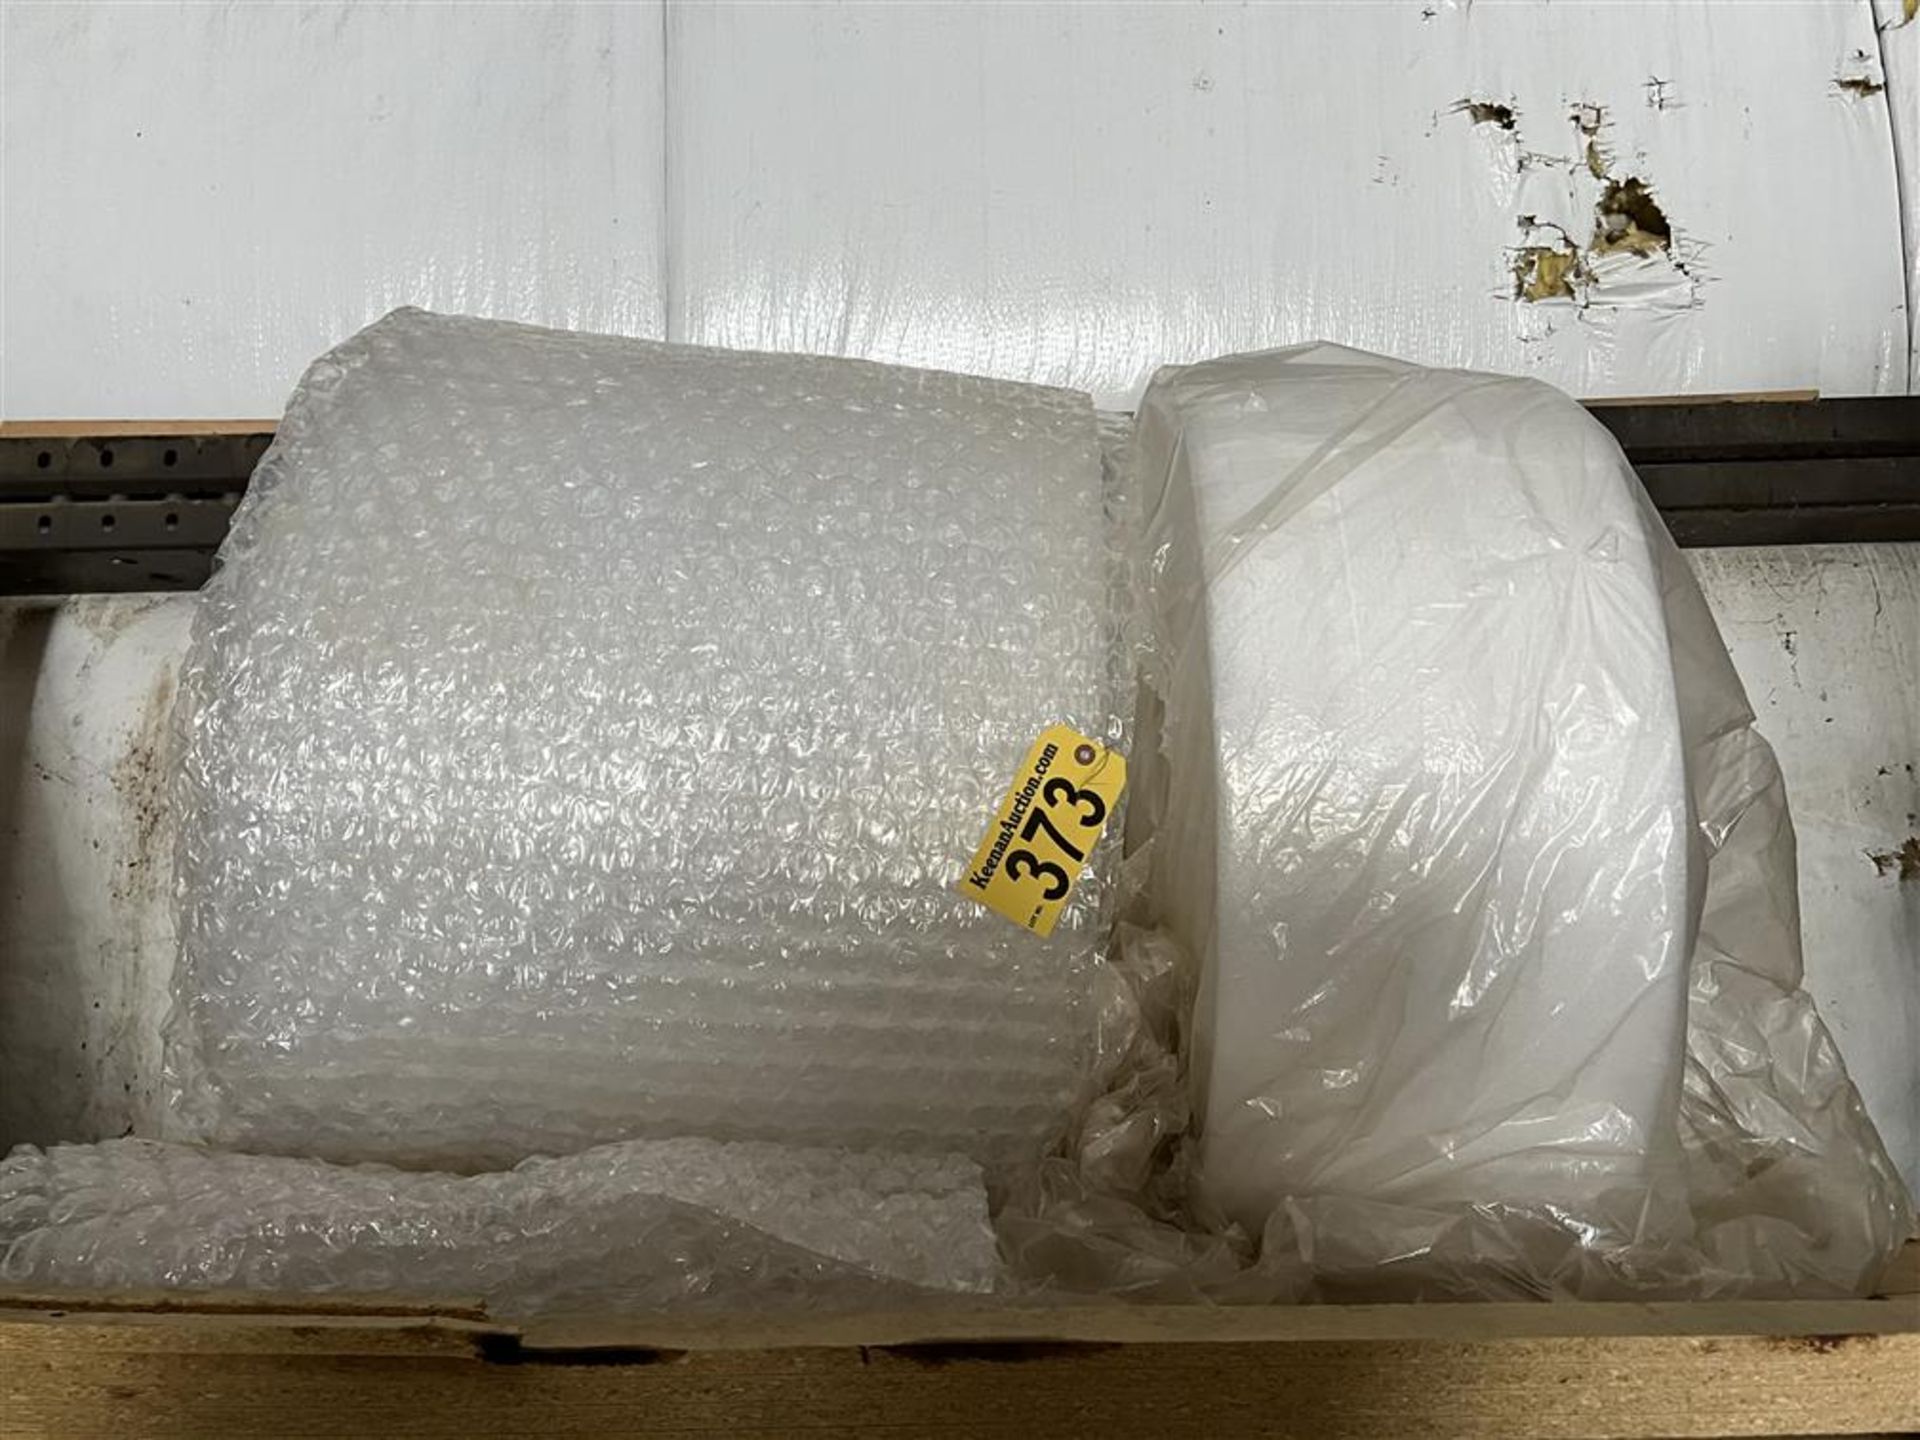 LOT: 2-ROLLS OF PACKING MATERIAL: BUBBLE WRAP & 4" SECTIONED PACKING FOAM